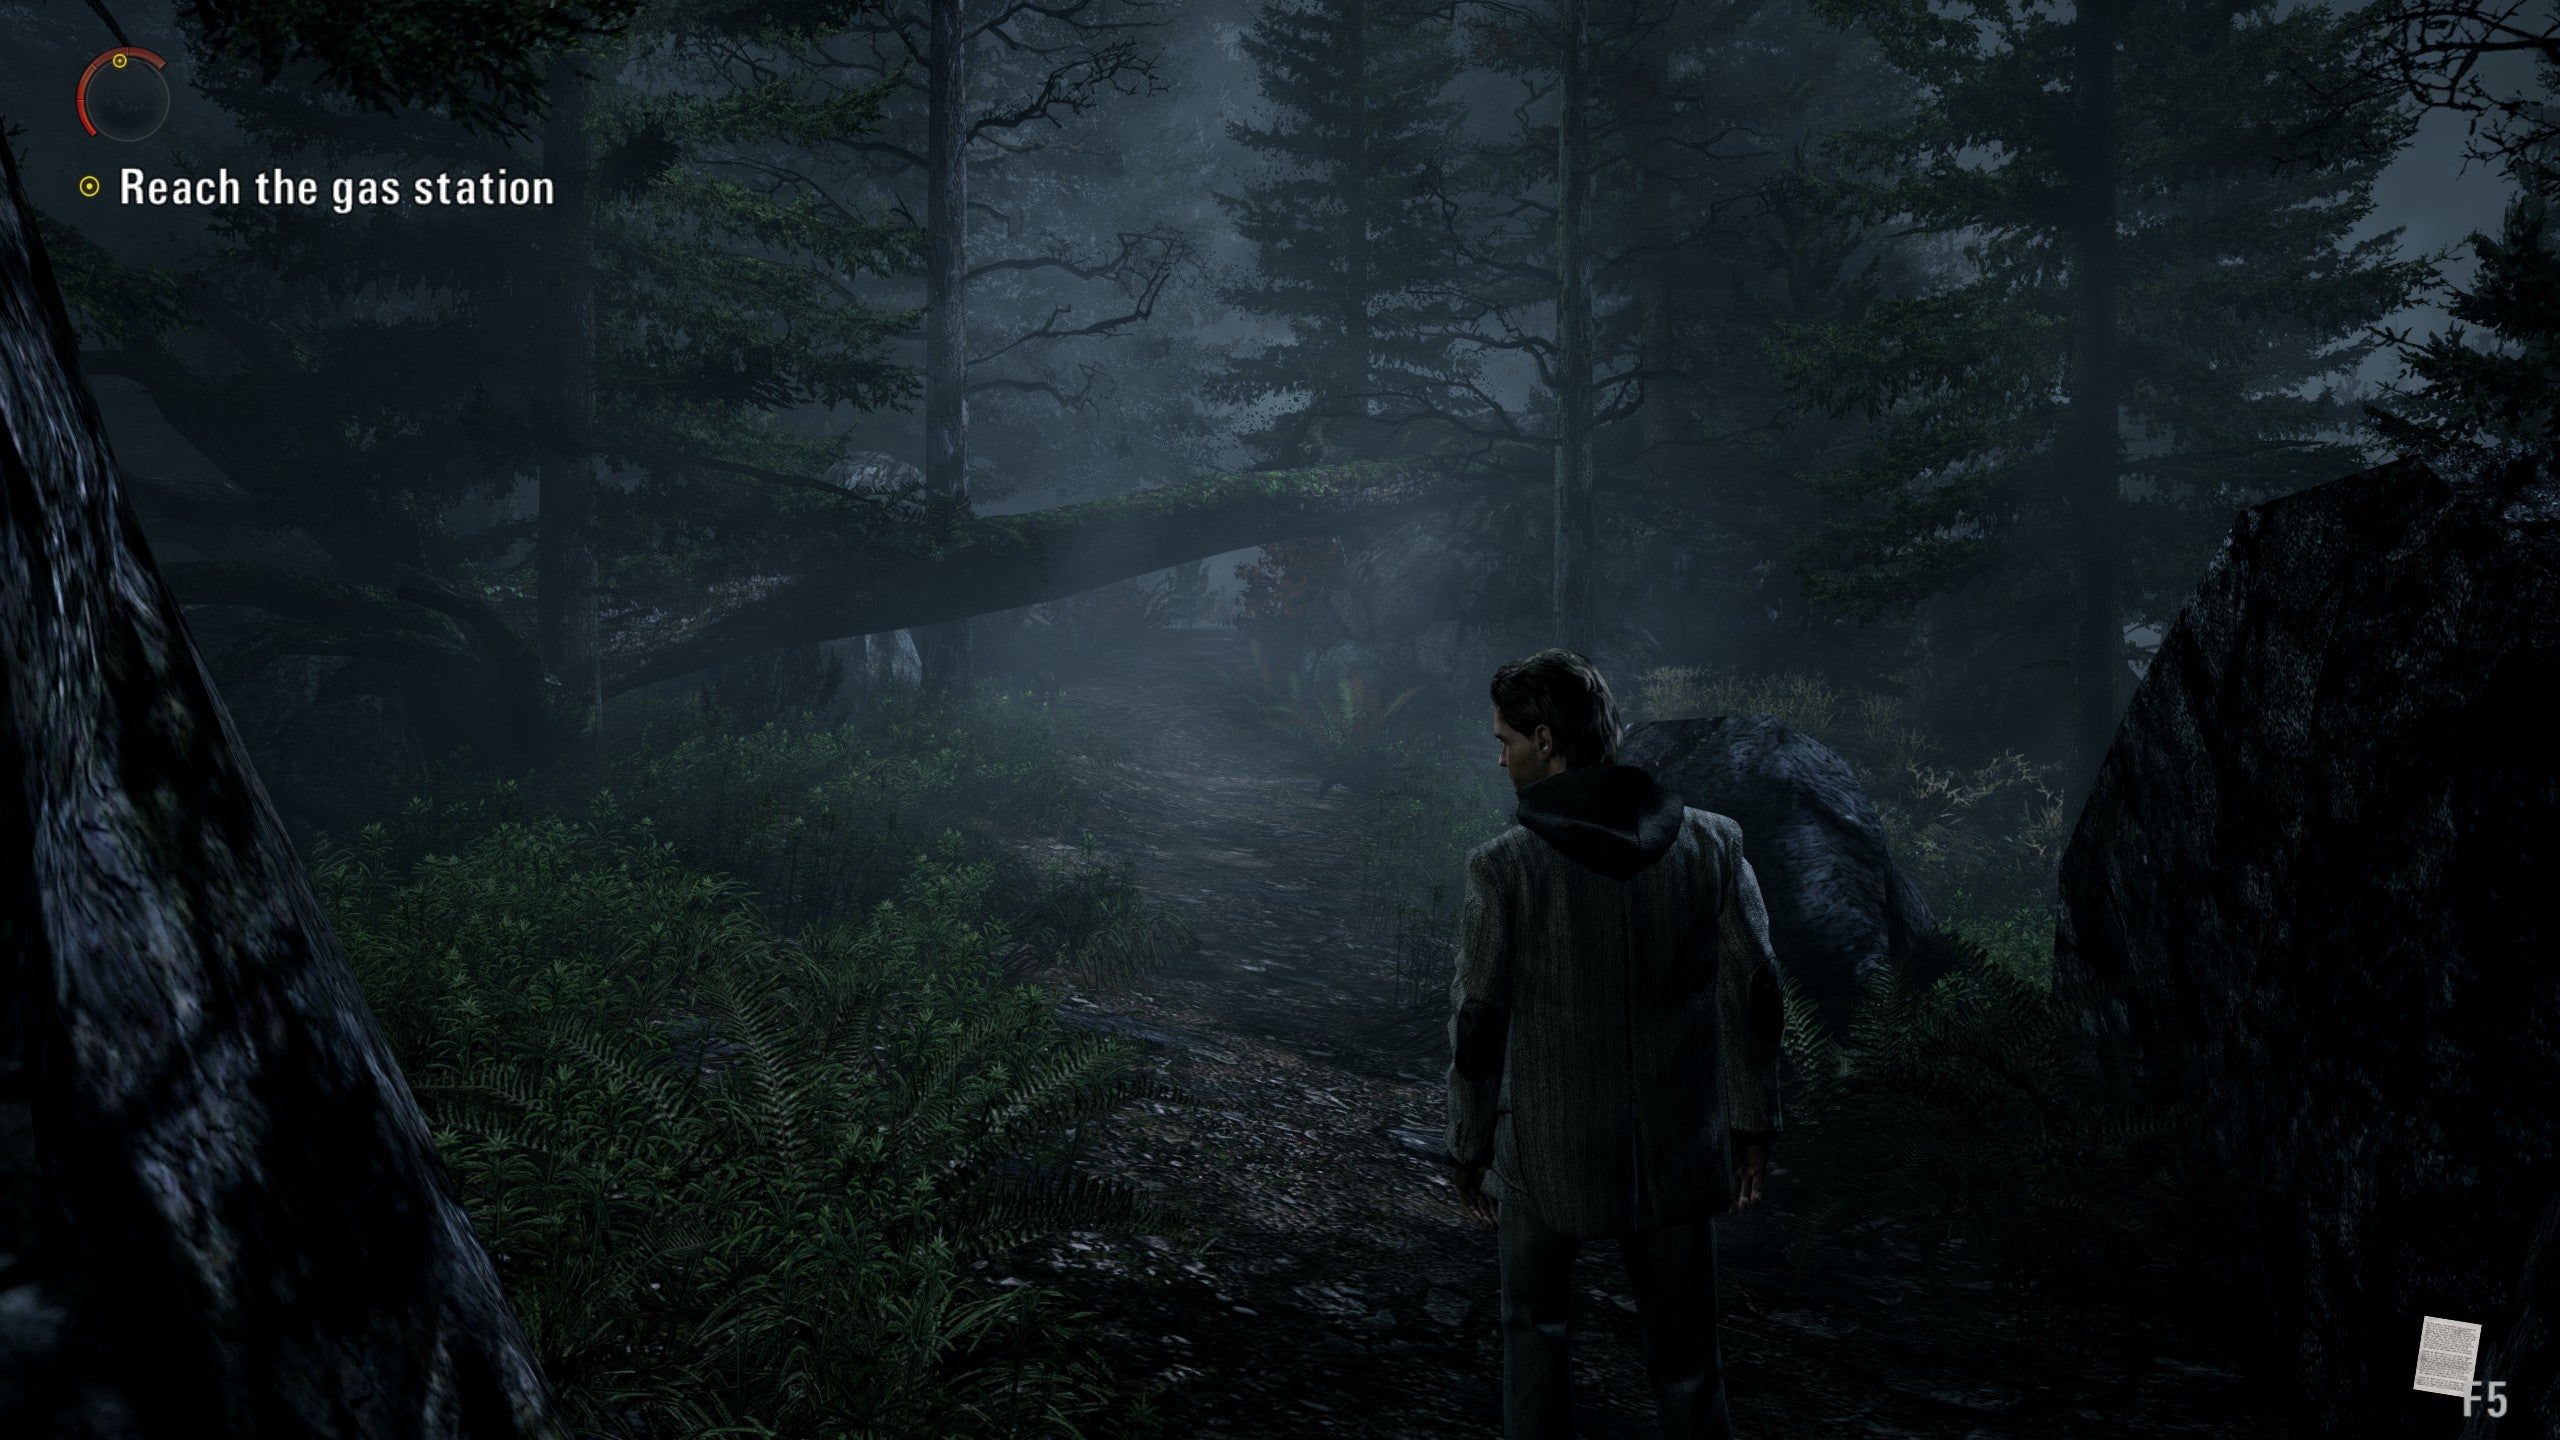 A screenshot of Alan Wake, showing Alan on a forest path.